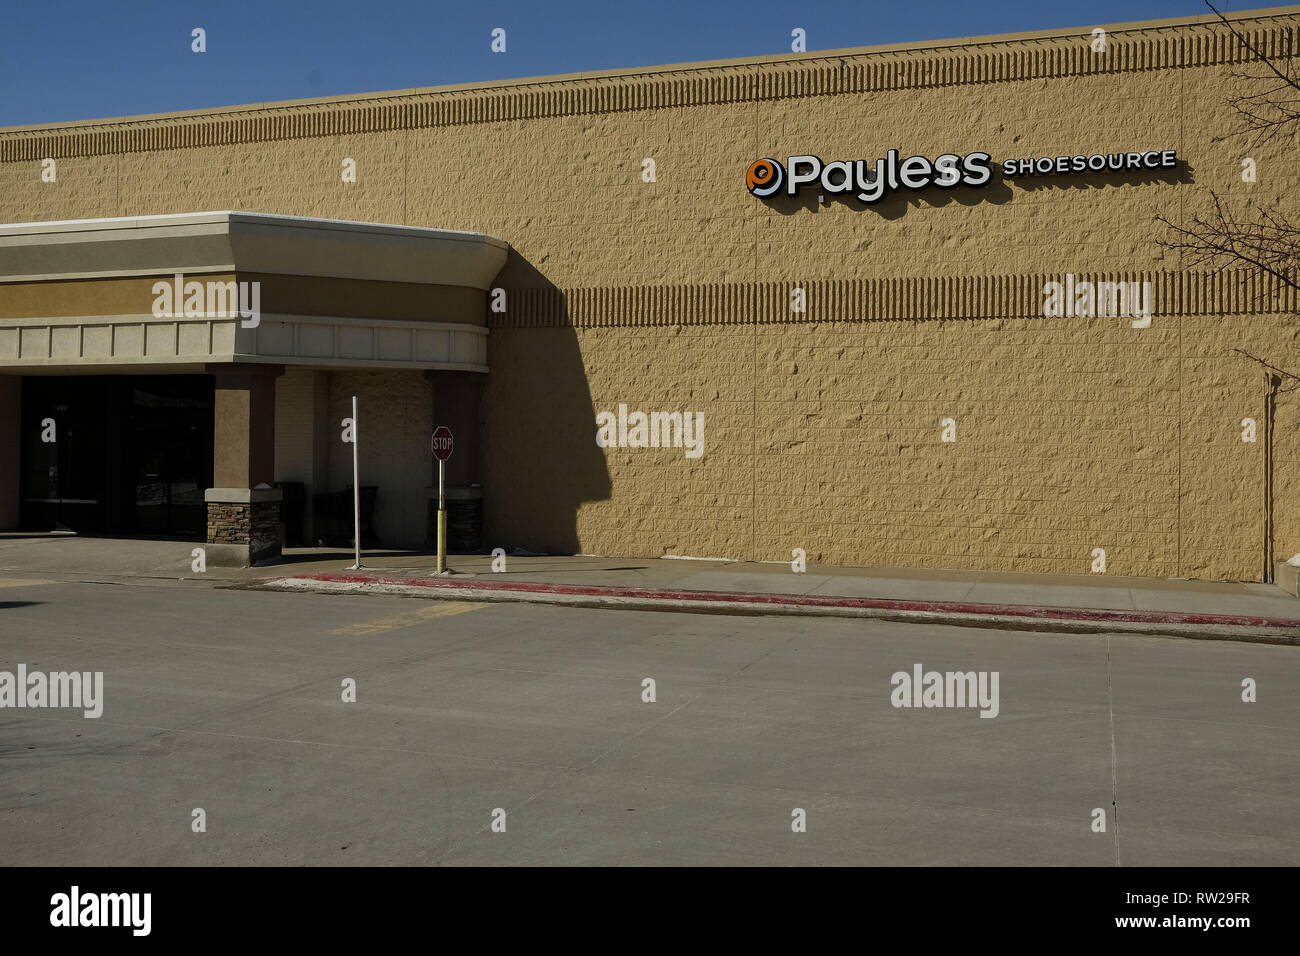 Sioux City, IOWA, USA. 4th Mar, 2018. While no closing or going out of business signs are yet seen at the Payless ShoeSource store located off of Hamilton Blvd. in Sioux City, Iowa, March 4, 2019, it and others are expected to be closing sometime in late March or May according to news reports in February, 2019 by the corporate headquarters. Credit: Jerry Mennenga/ZUMA Wire/Alamy Live News Stock Photo